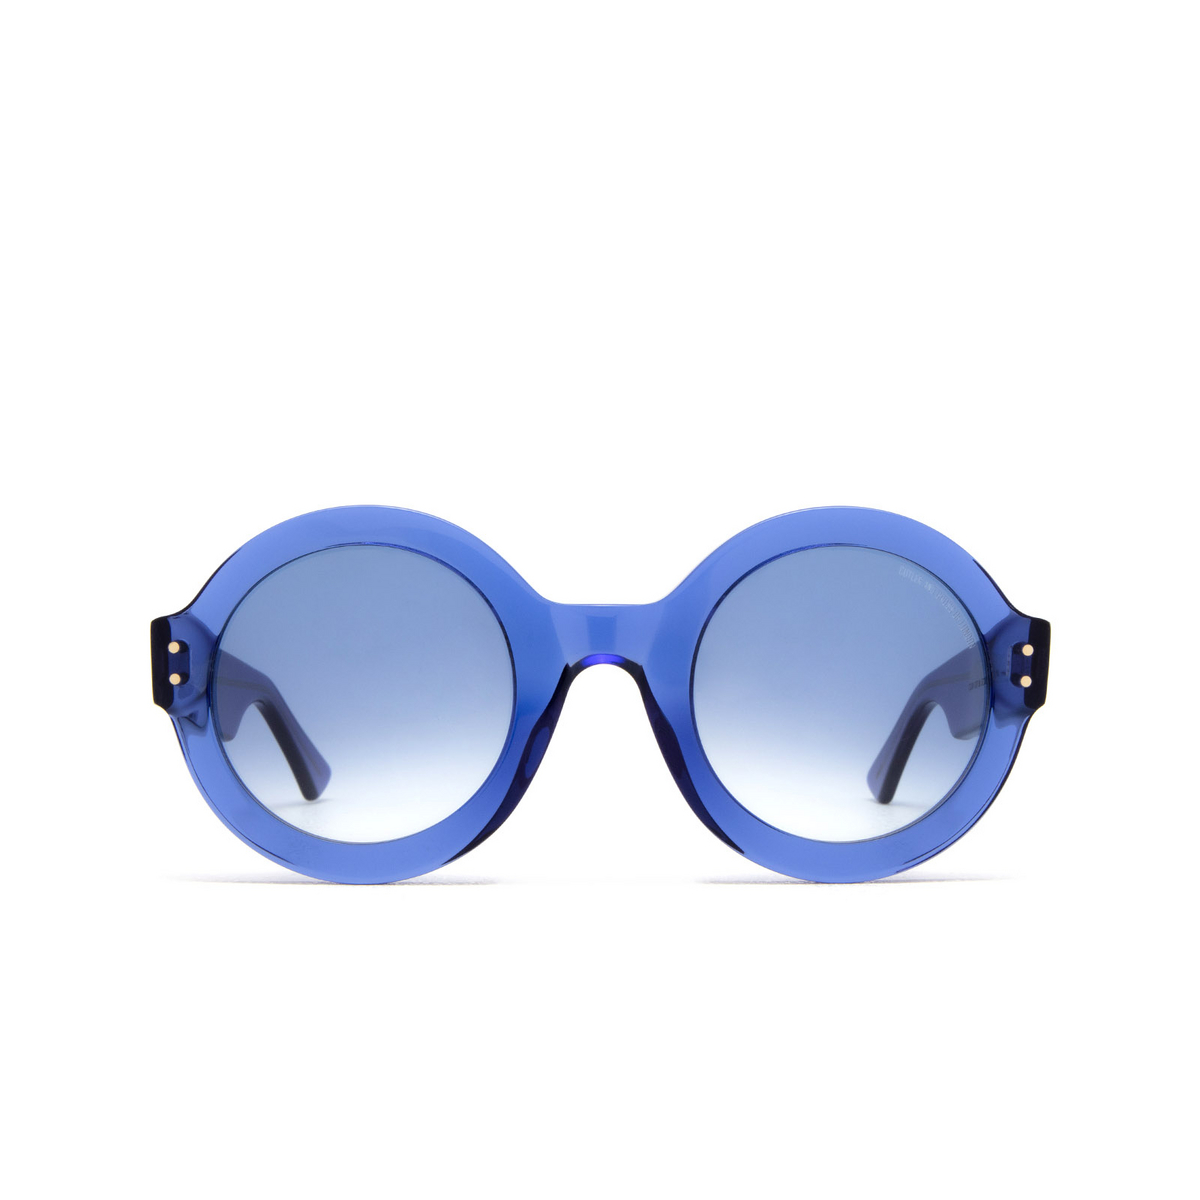 Cutler and Gross 1377 Sunglasses 06 Prussian Blue - front view